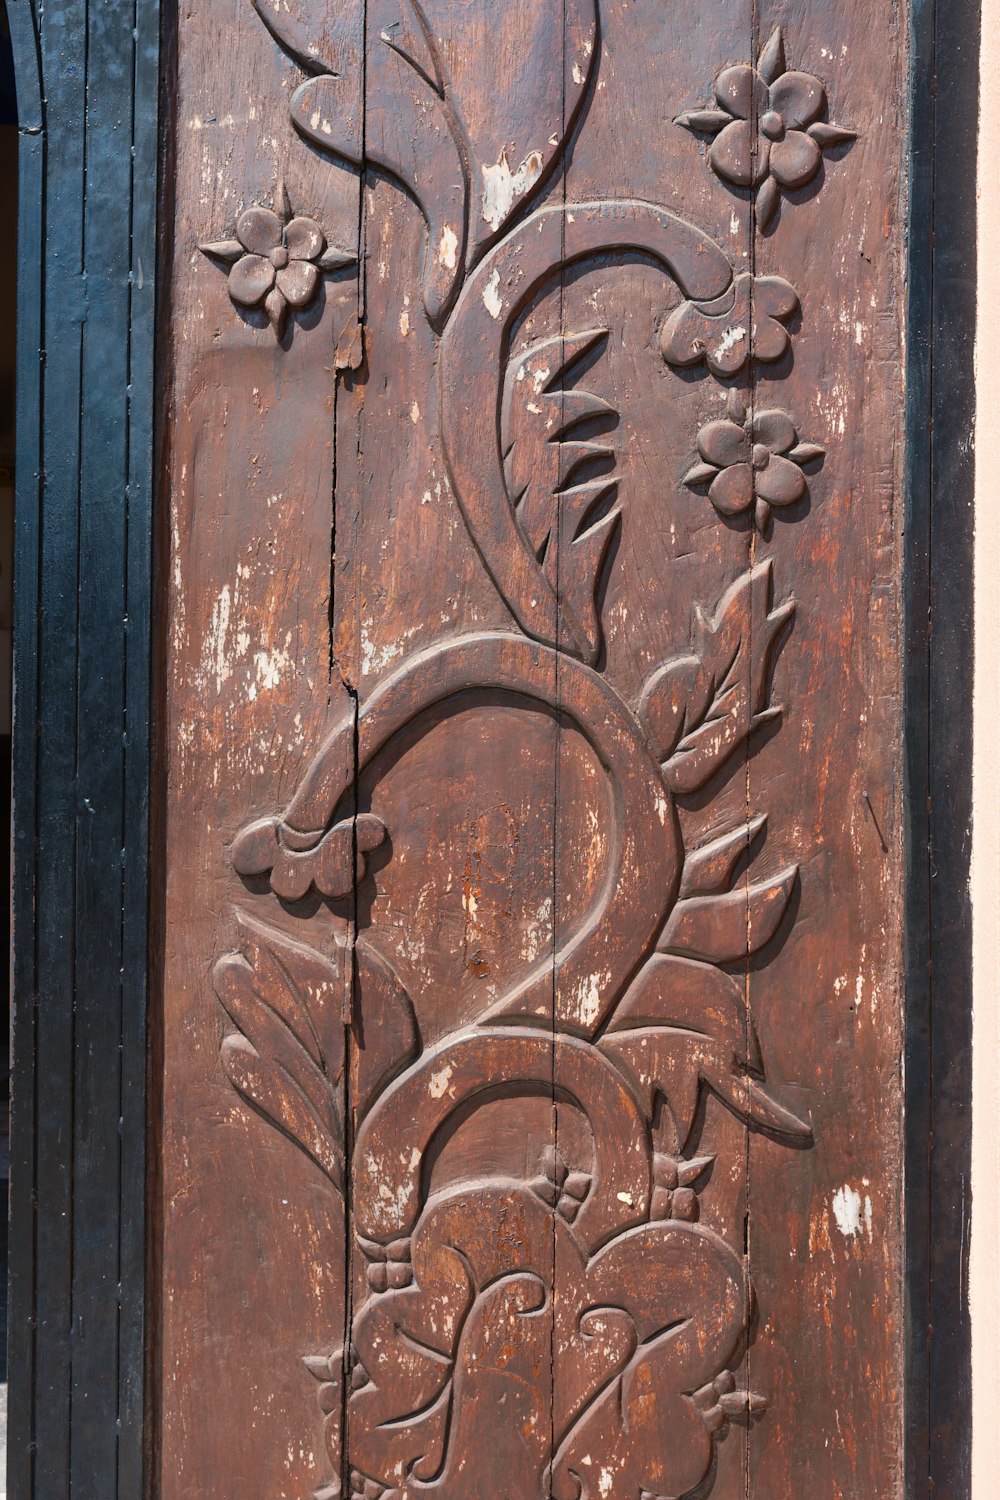 a close up of a wooden door with carvings on it